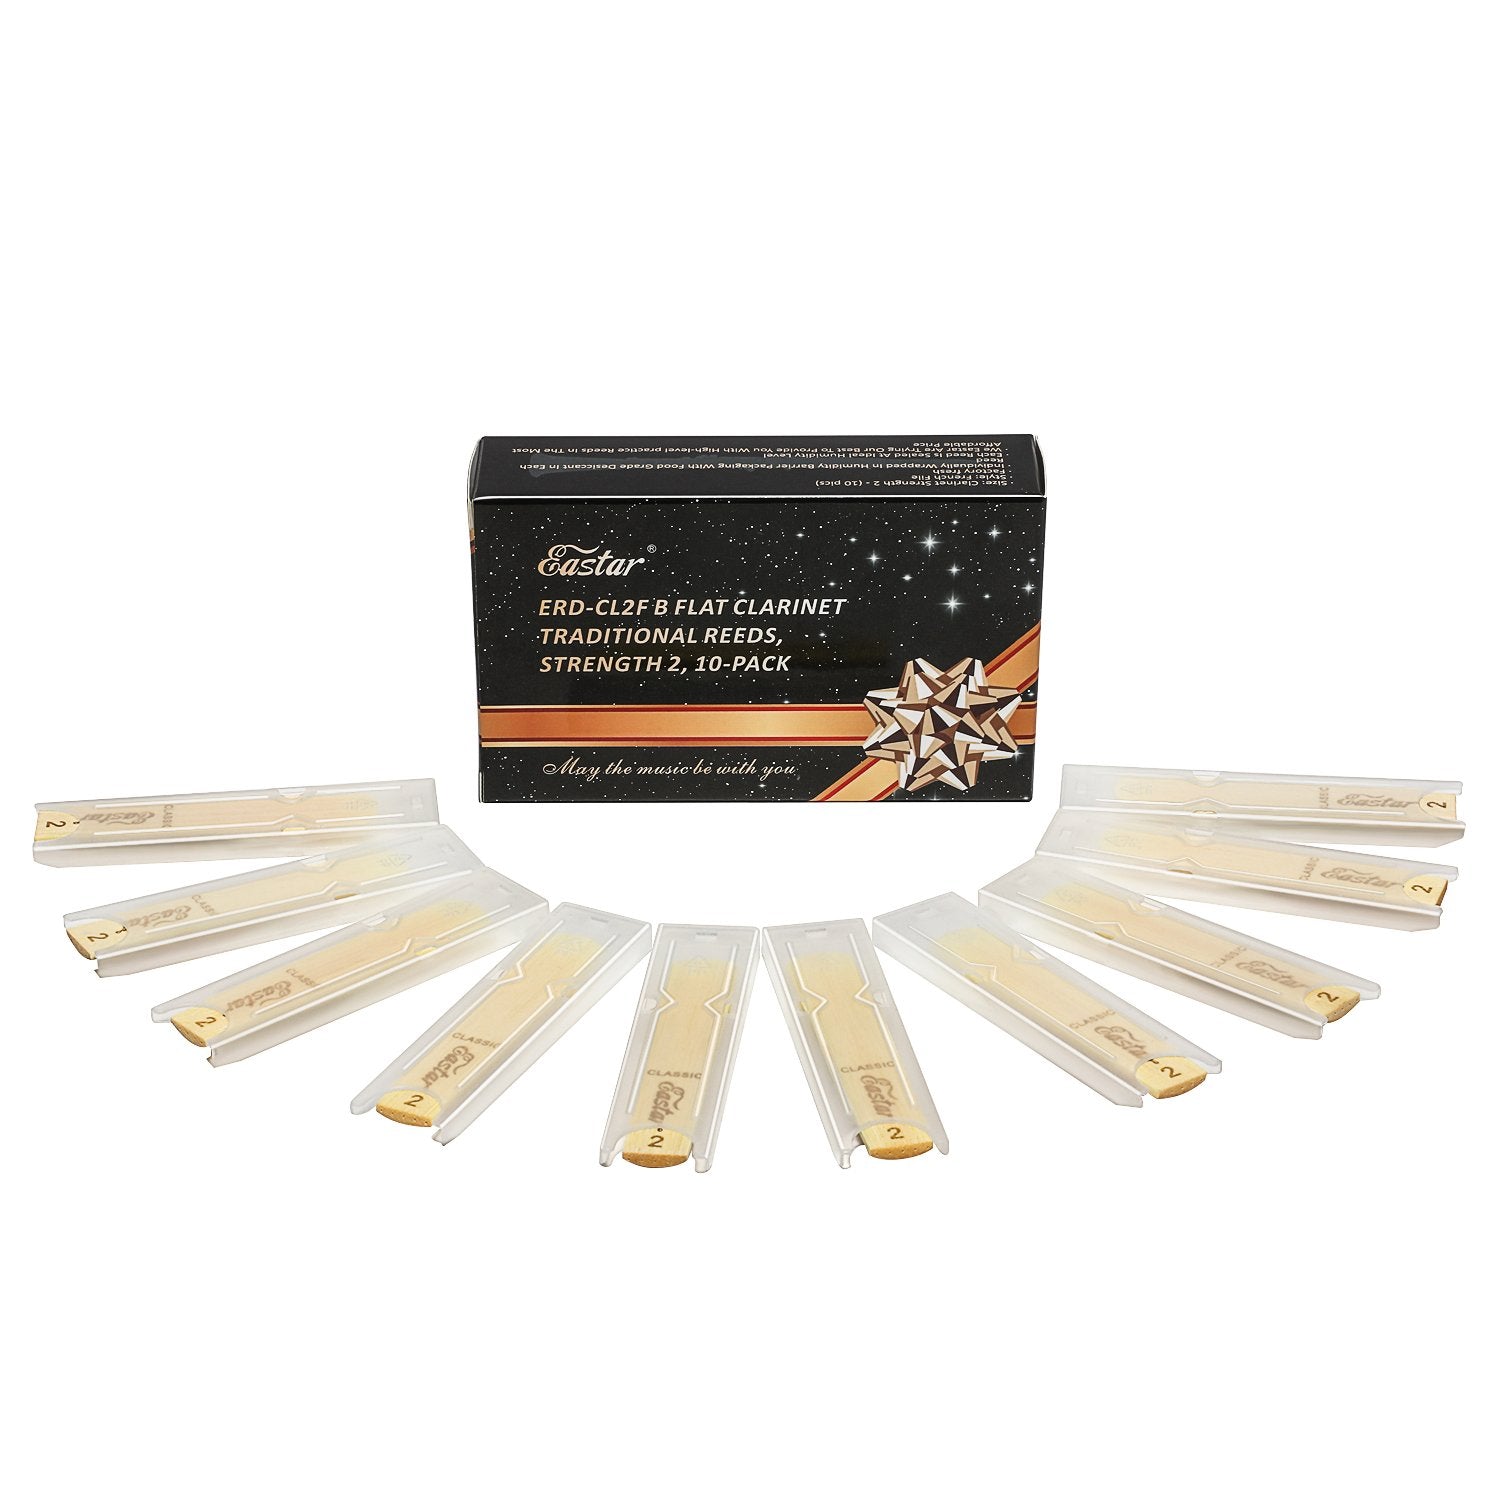 

Eastar 10 Pack Bb Clarinet Reeds 3.0 ERD-CL3.0F, Traditional B Flat Clarinet Reeds With Box